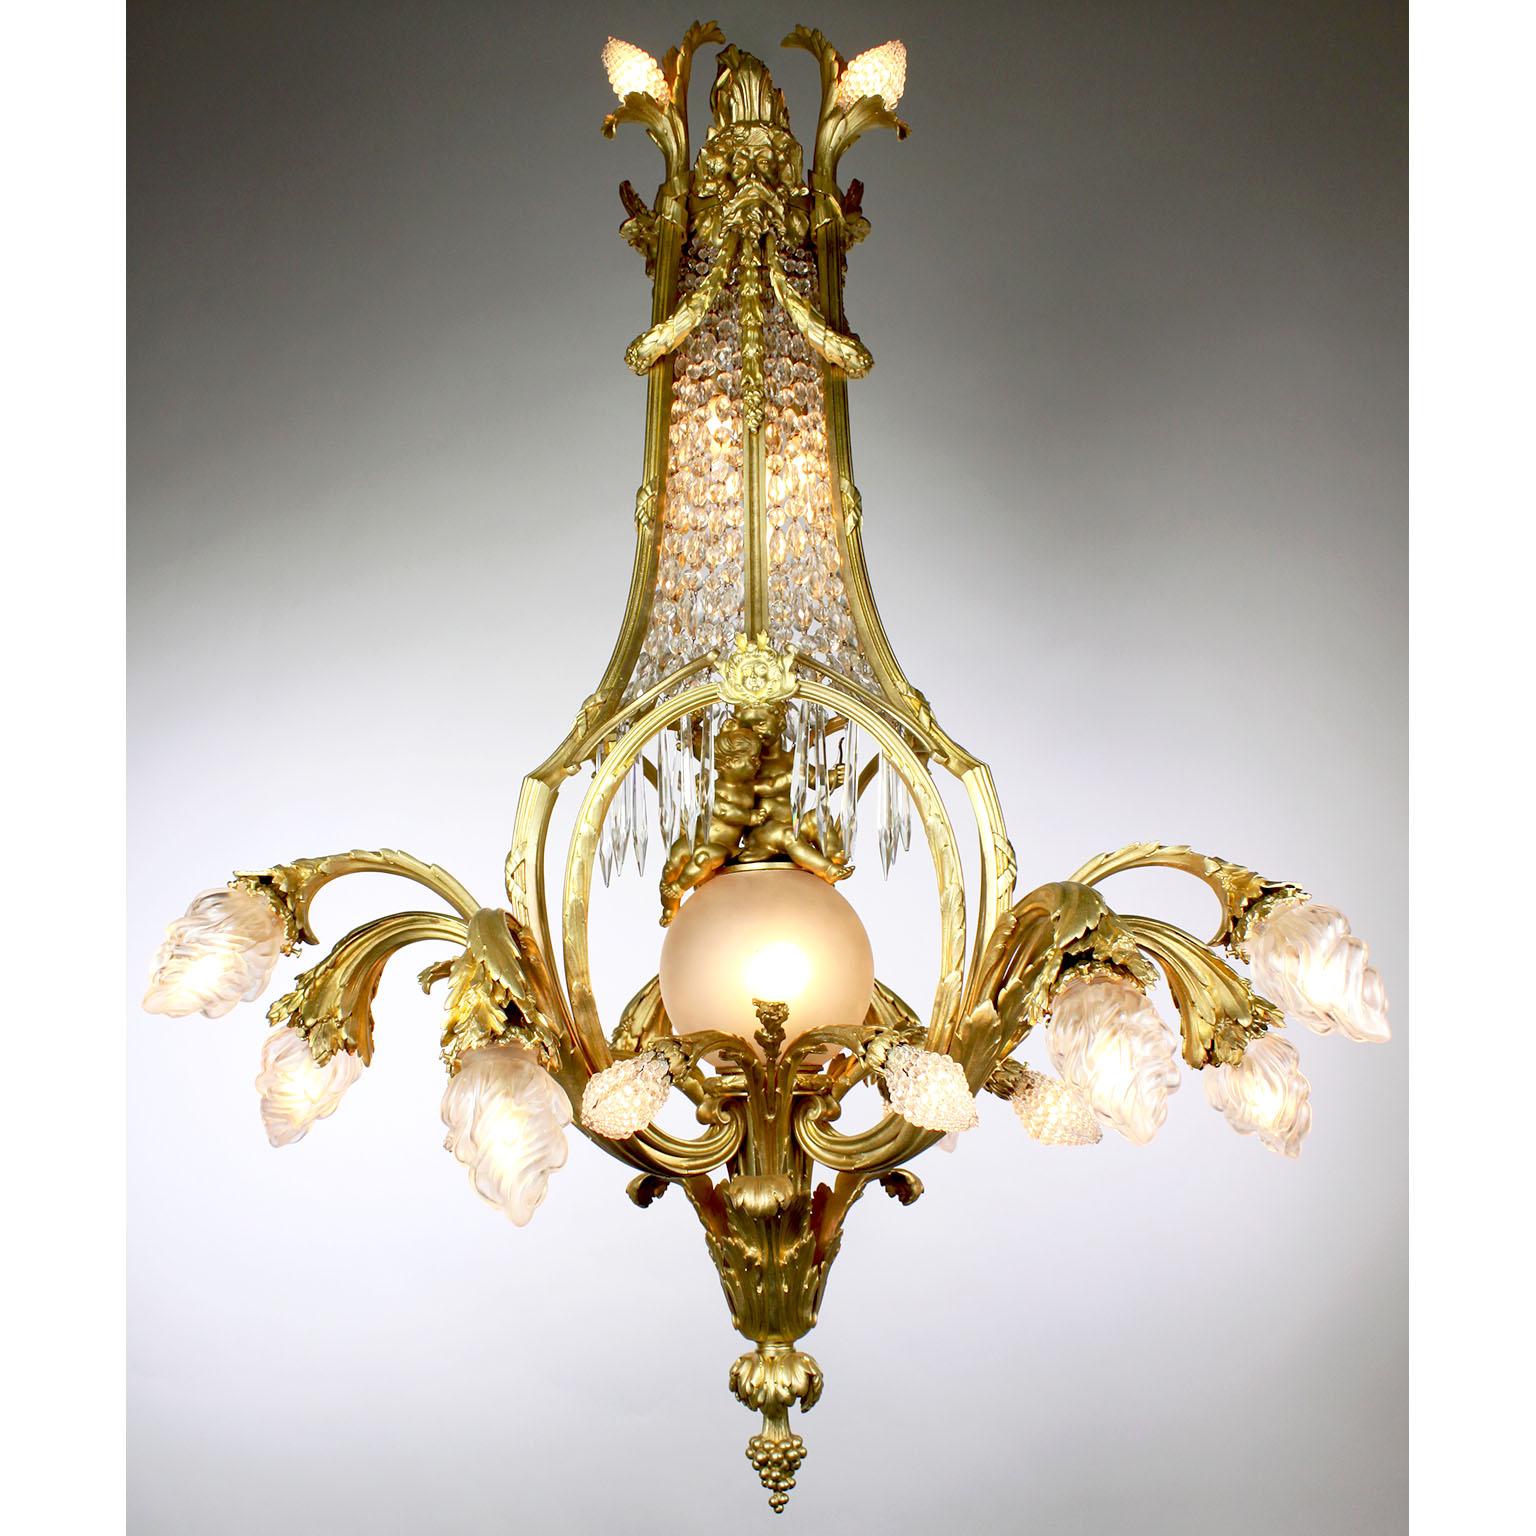 French Belle Époque Gilt-Bronze and Cut-Glass Figural Cherub & Putto Chandelier In Good Condition For Sale In Los Angeles, CA